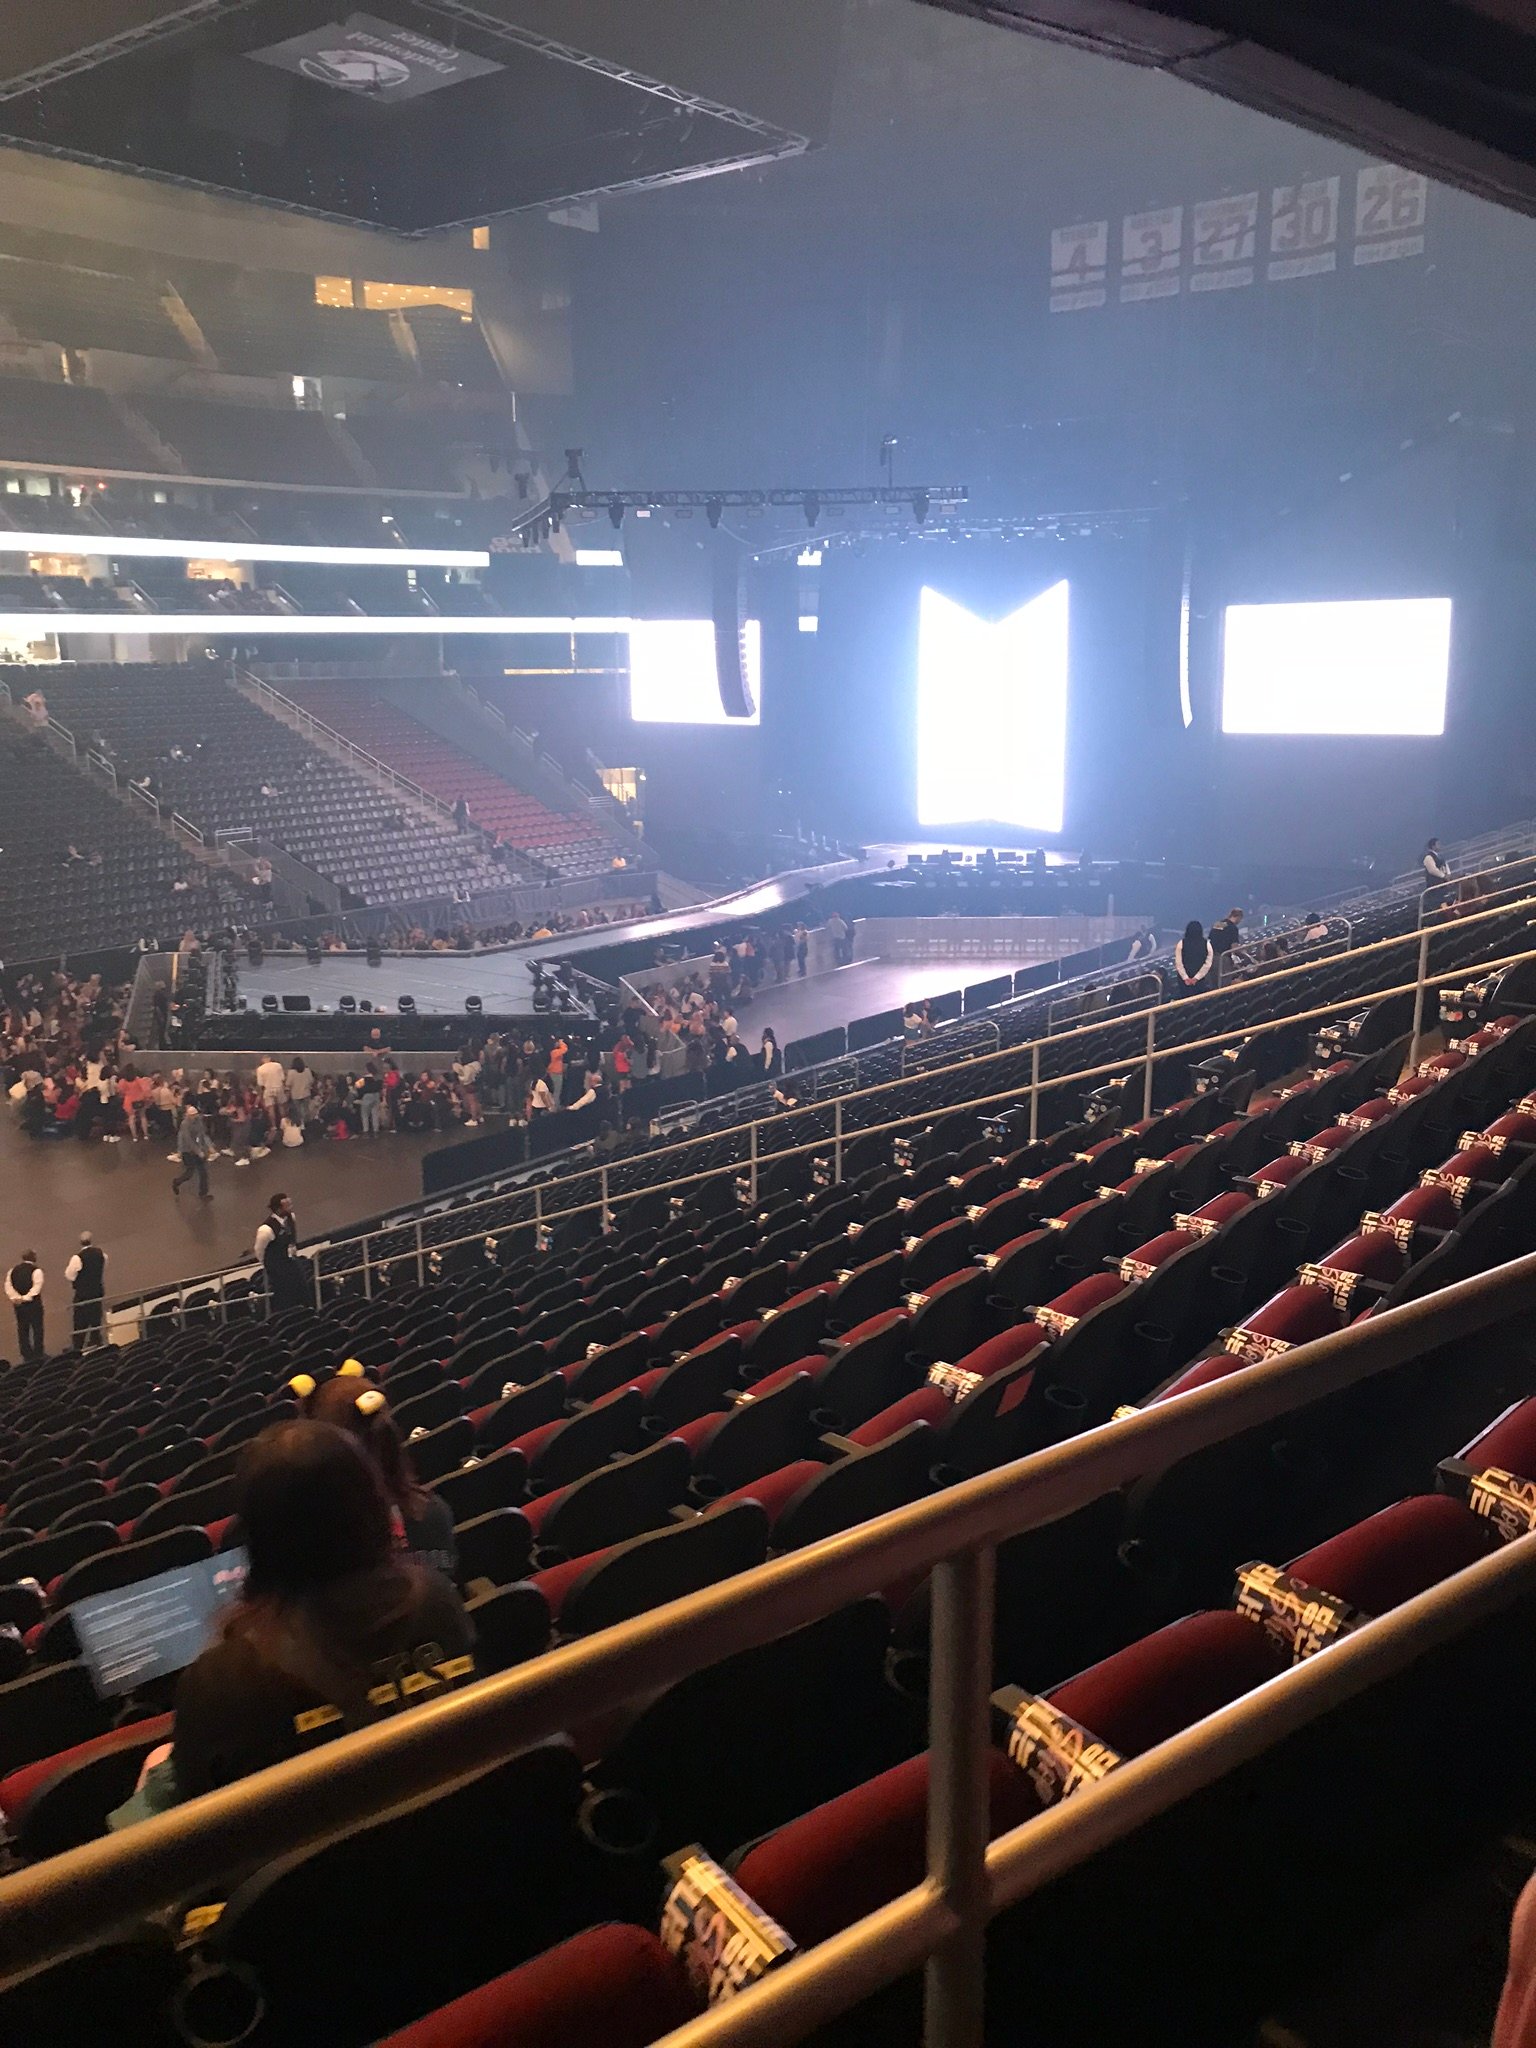 every seat a good seat - Review of Prudential Center, Newark, NJ -  Tripadvisor